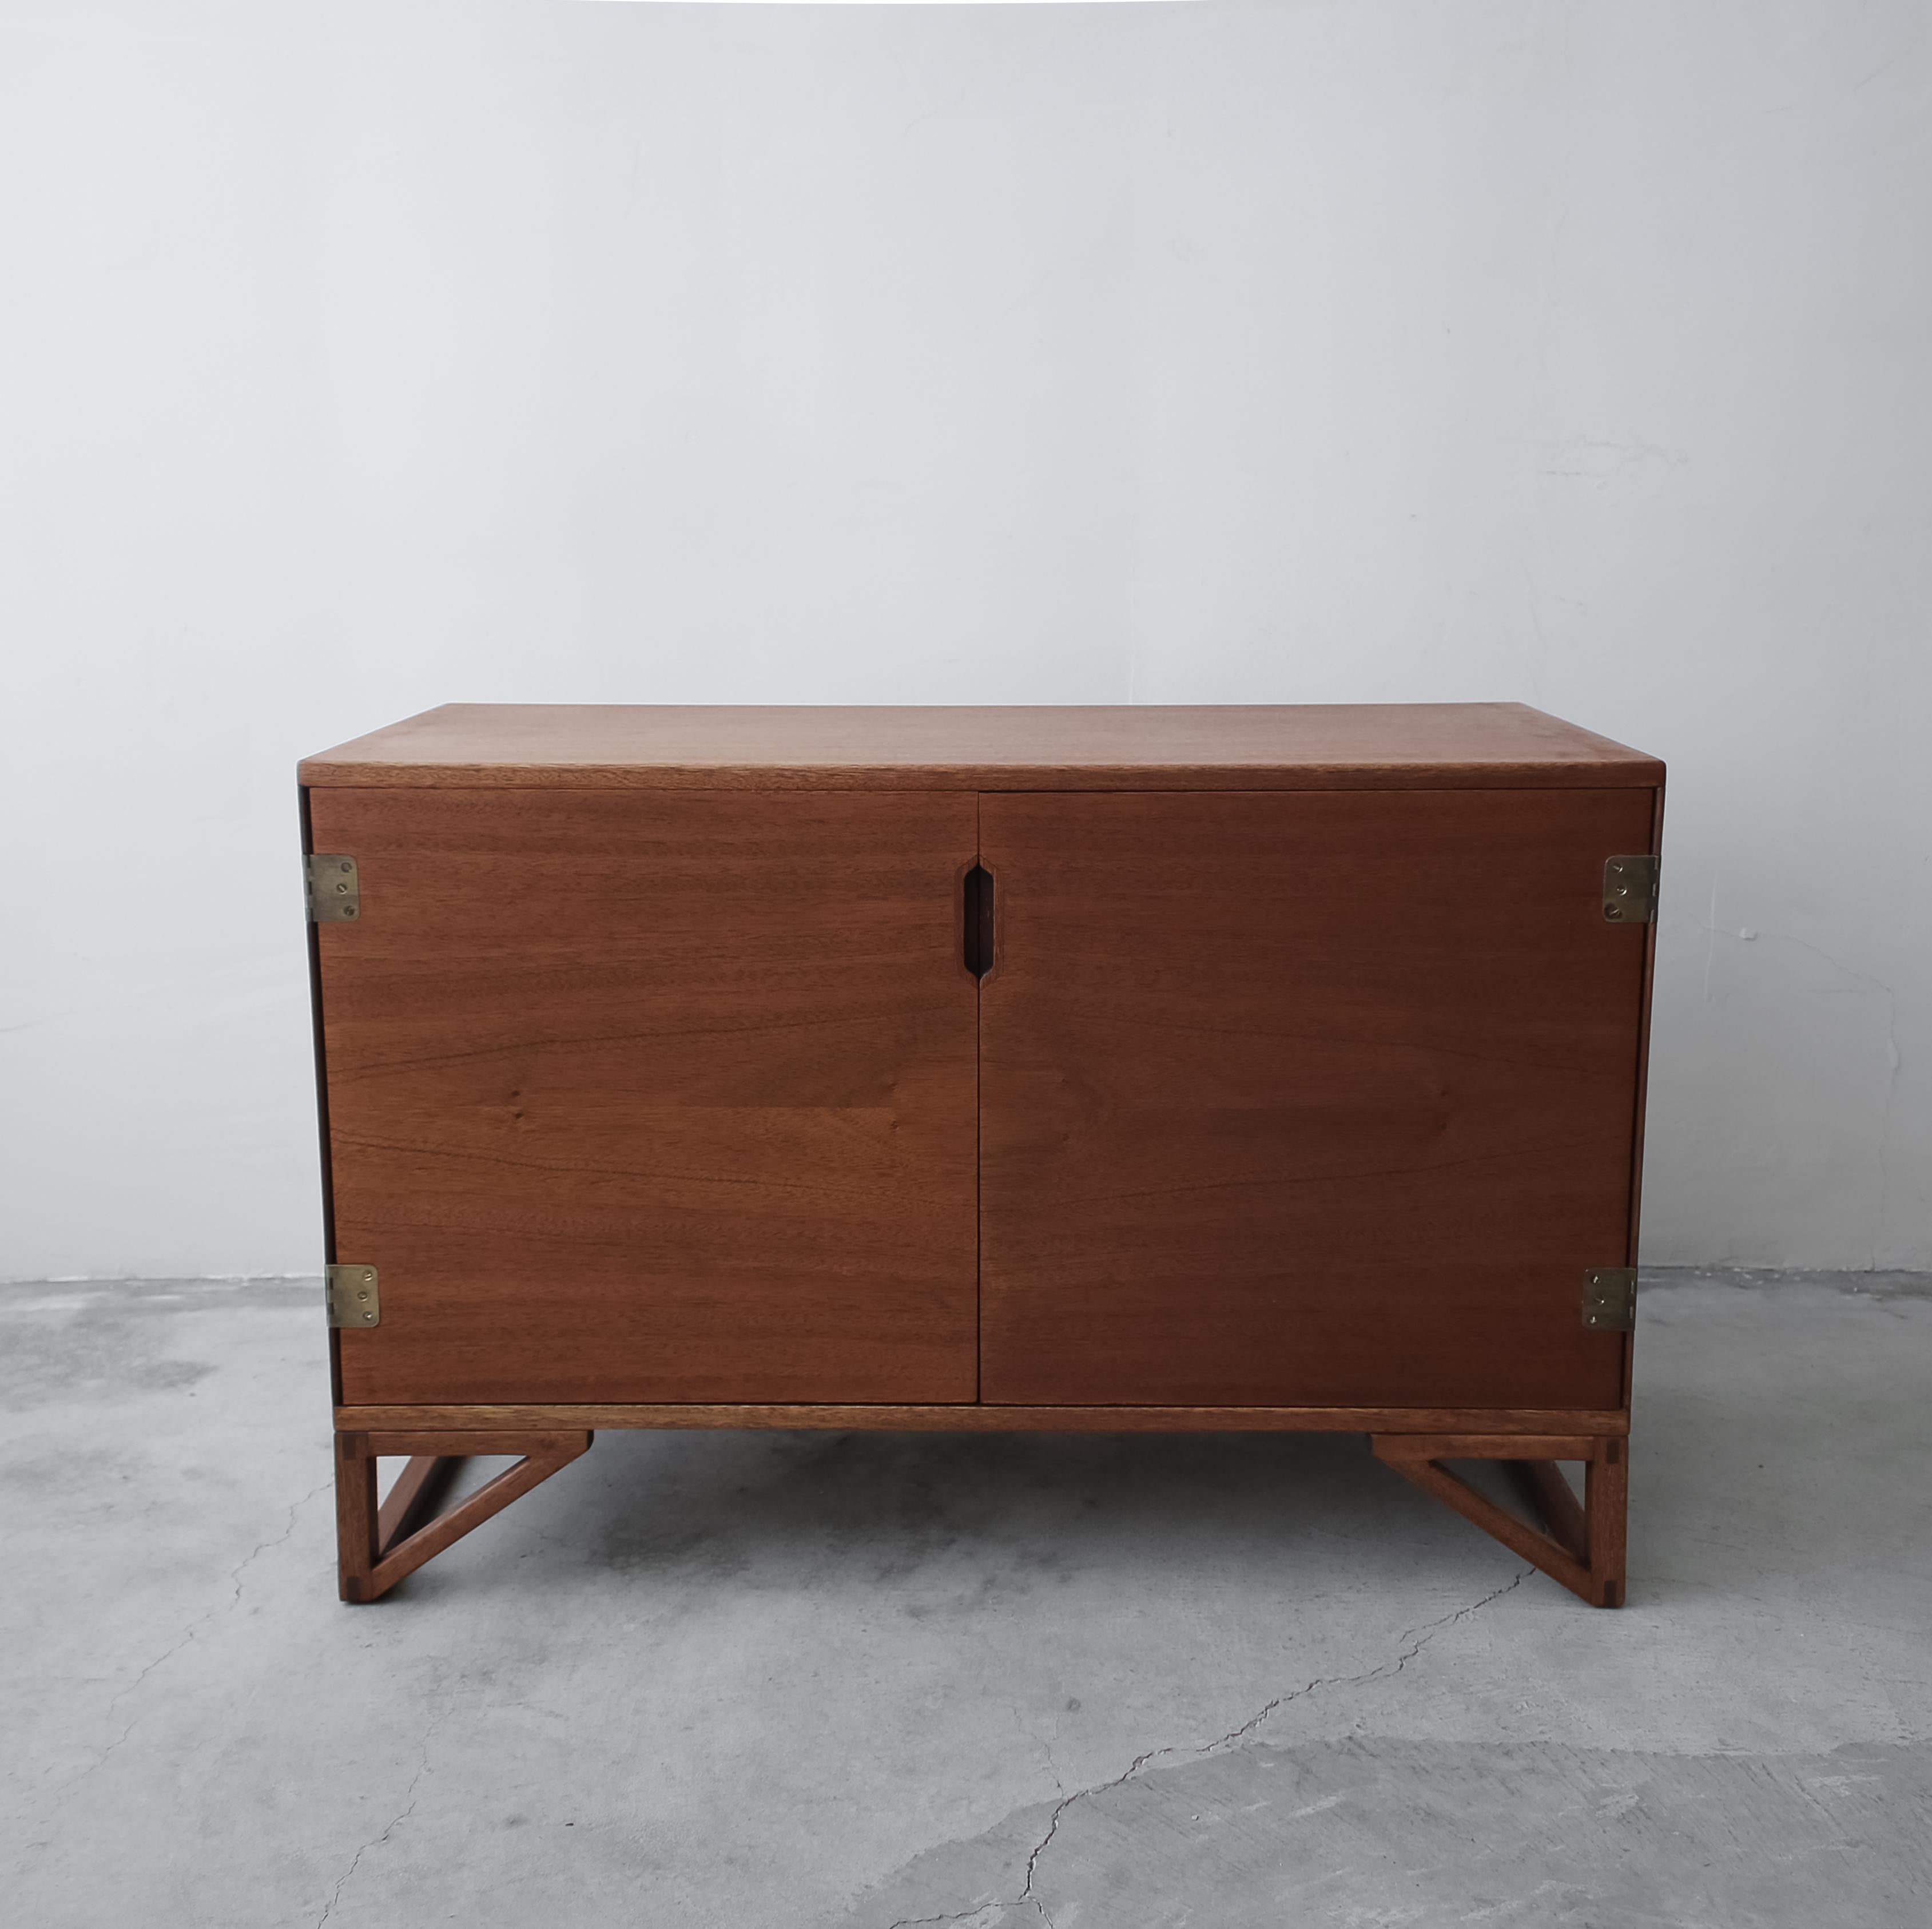 Simple, petite Danish credenza by Svend Langkilde. Simply clean lines and small size make it perfect for and small space that needs a bit of hidden storage.

Credenza is in overall good vintage condition. The back has been painted green and there